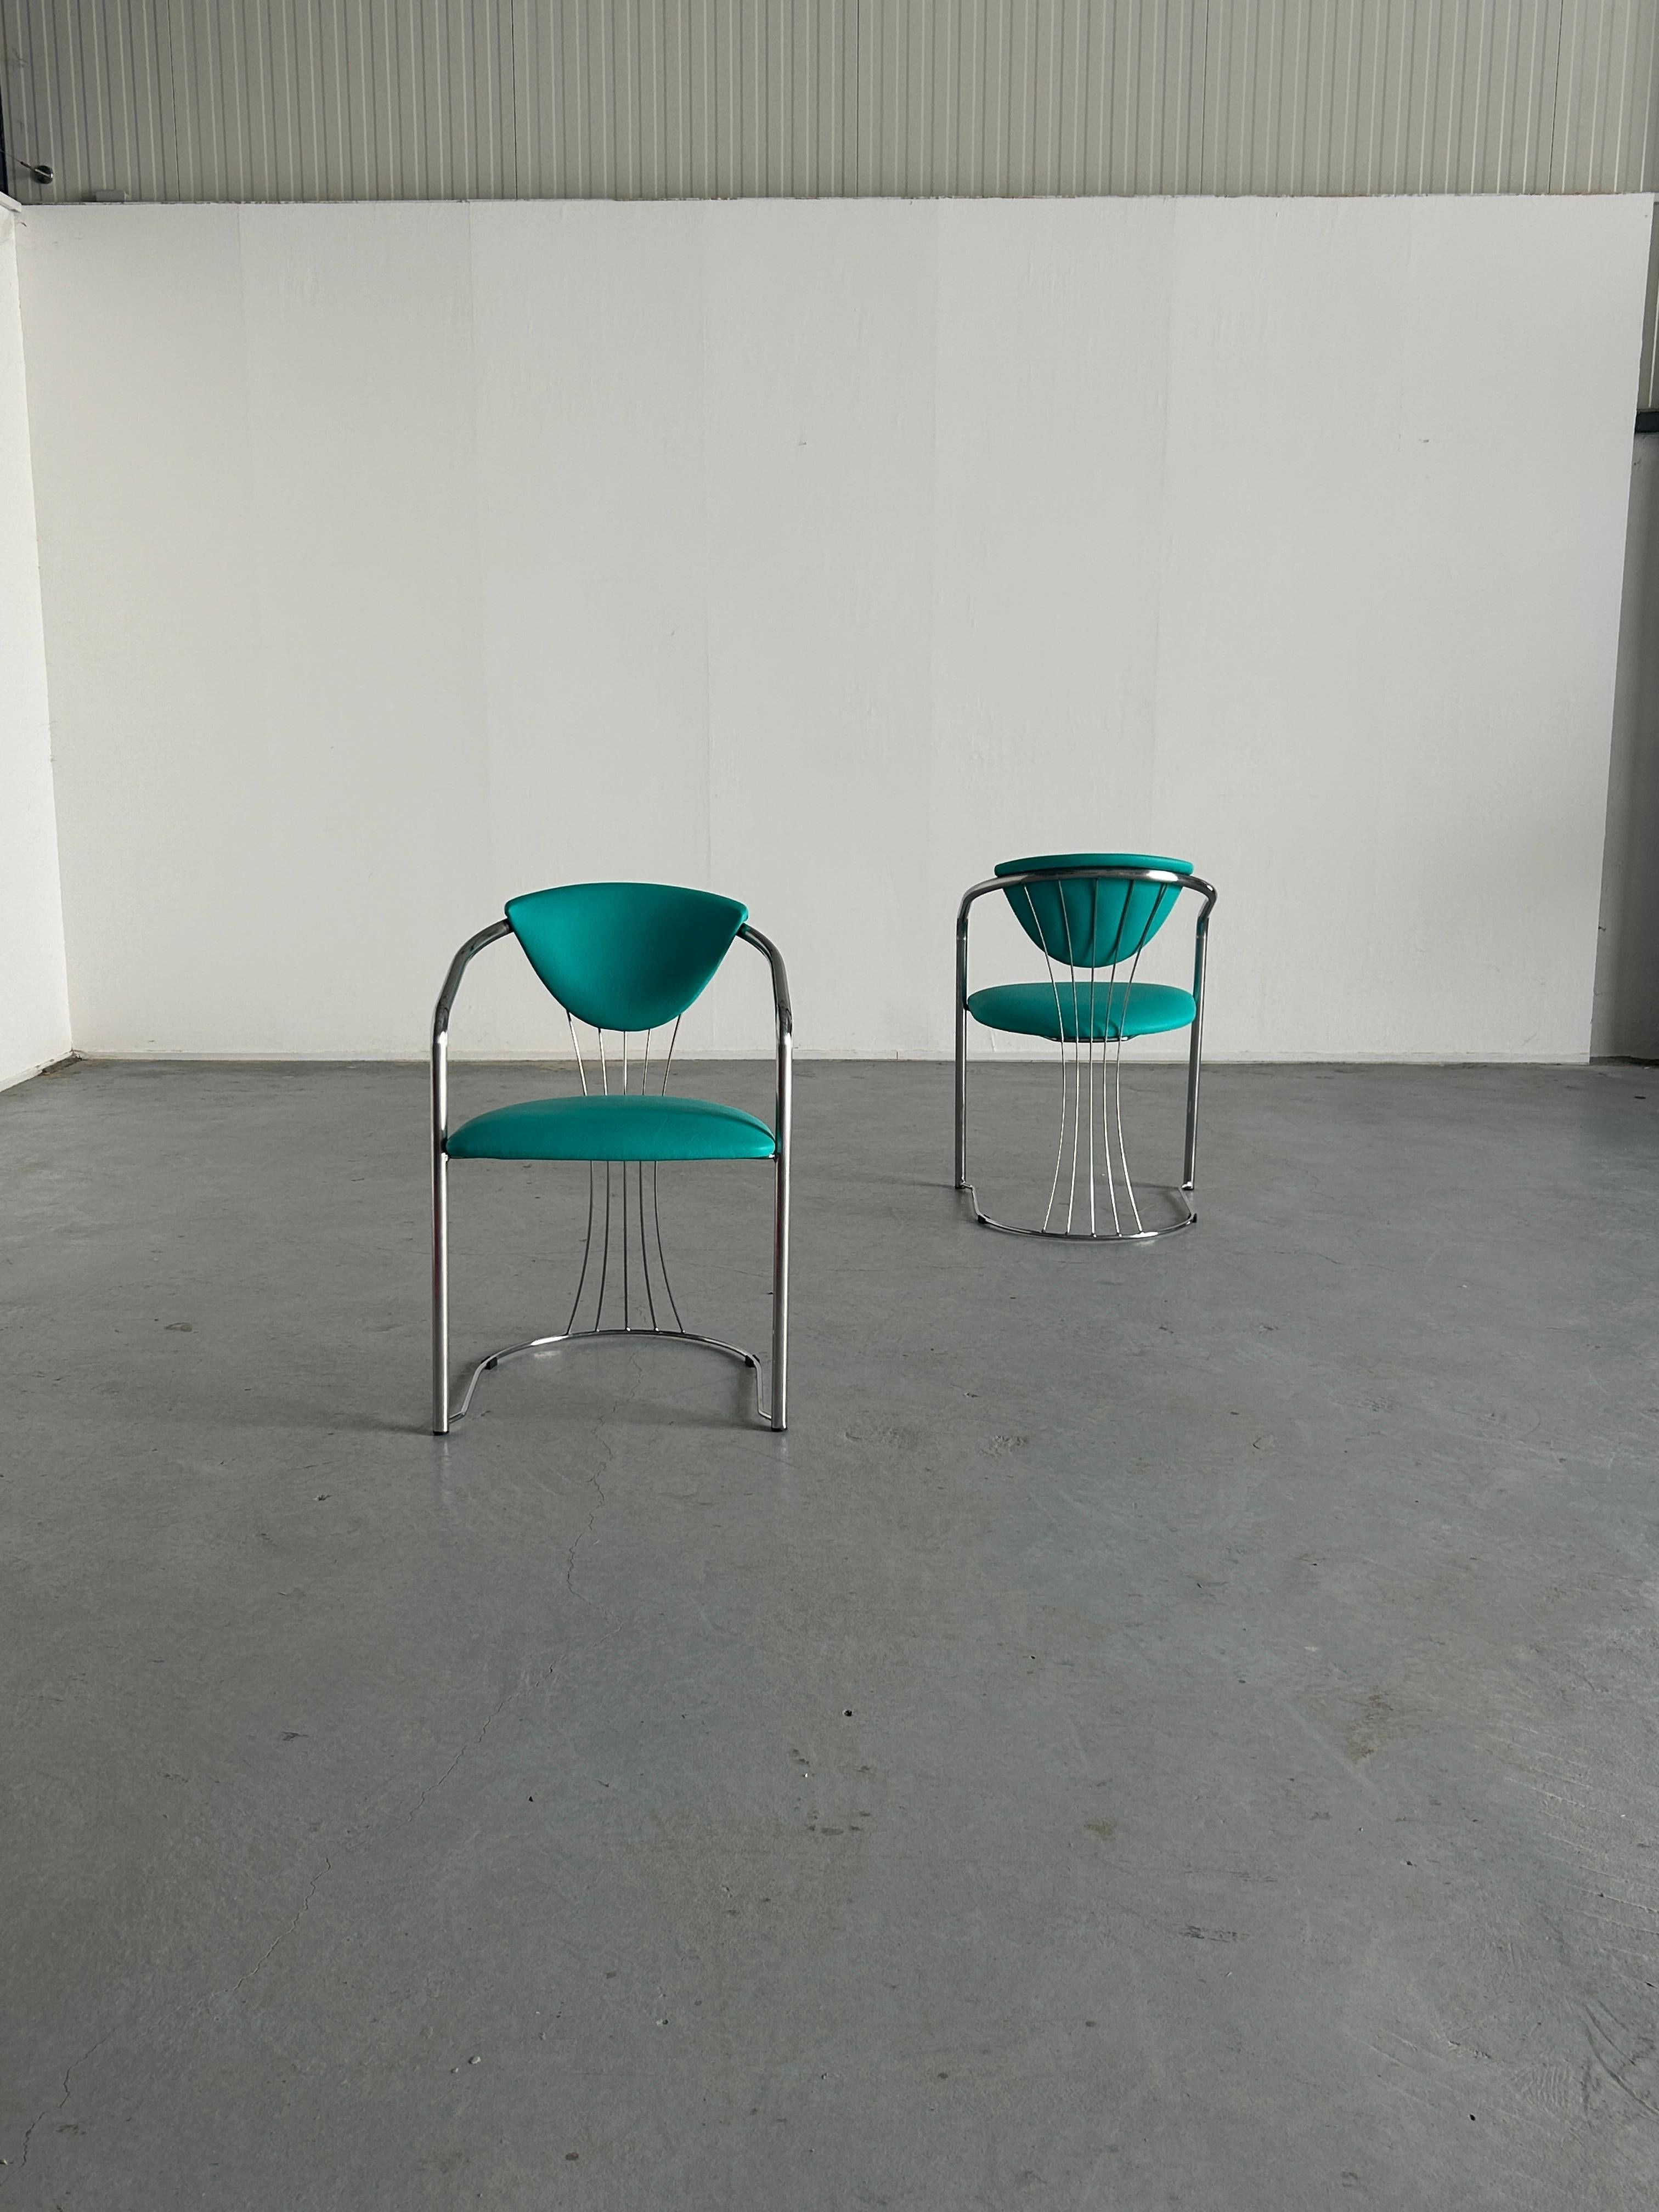 Italian 1 of 2 Vintage Steel and Mint Green Faux Leather Dining Chairs by Effezeta, 90s For Sale